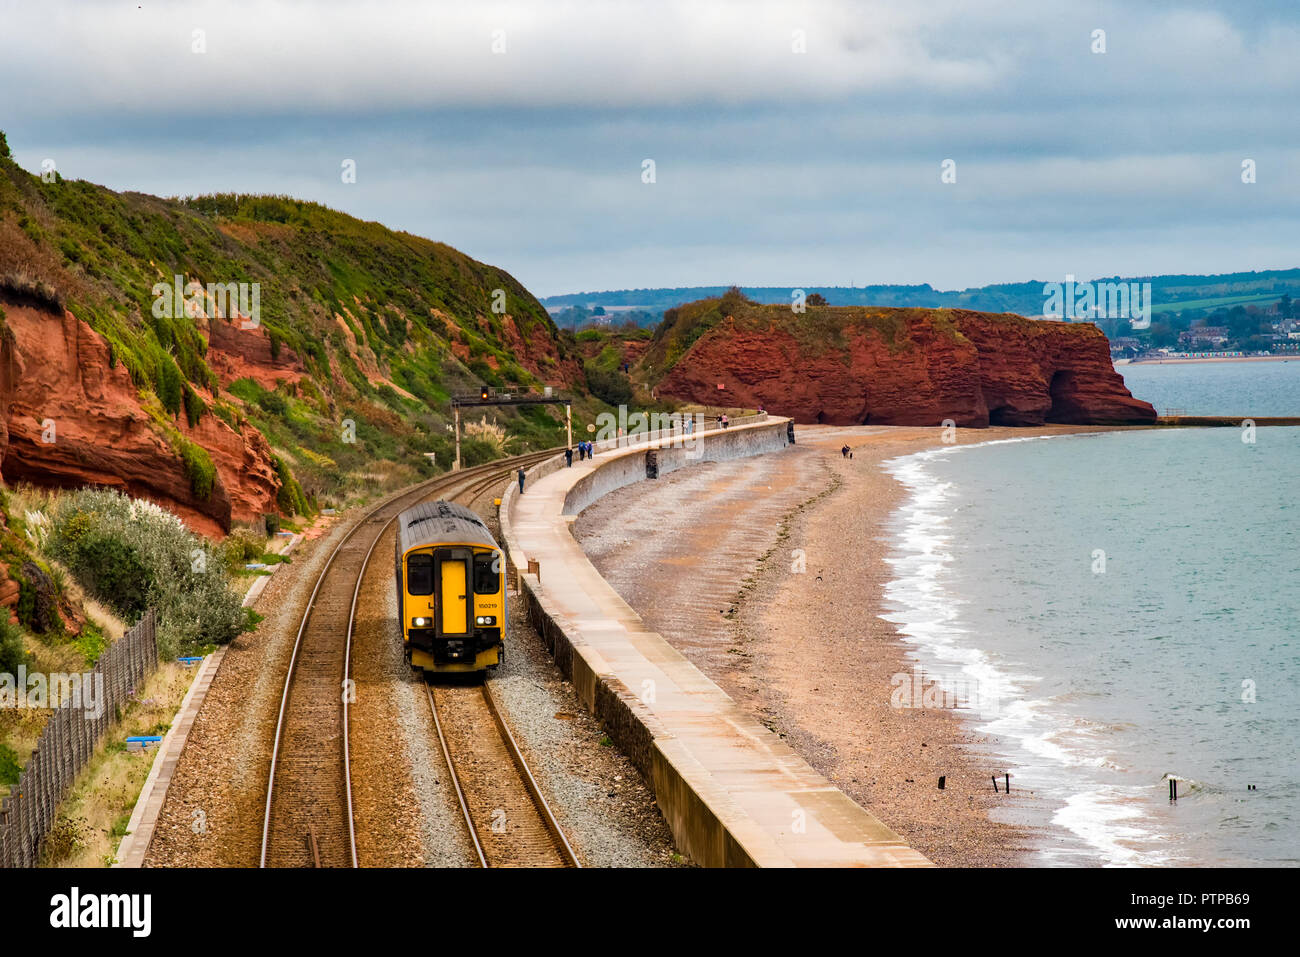 DAWLISH, DEVON, UK - 04OCT2018: GWR Class 150 Sprinter train  travelling south along the sea wall at Dawlish. Langstone Rock is in the background. Stock Photo